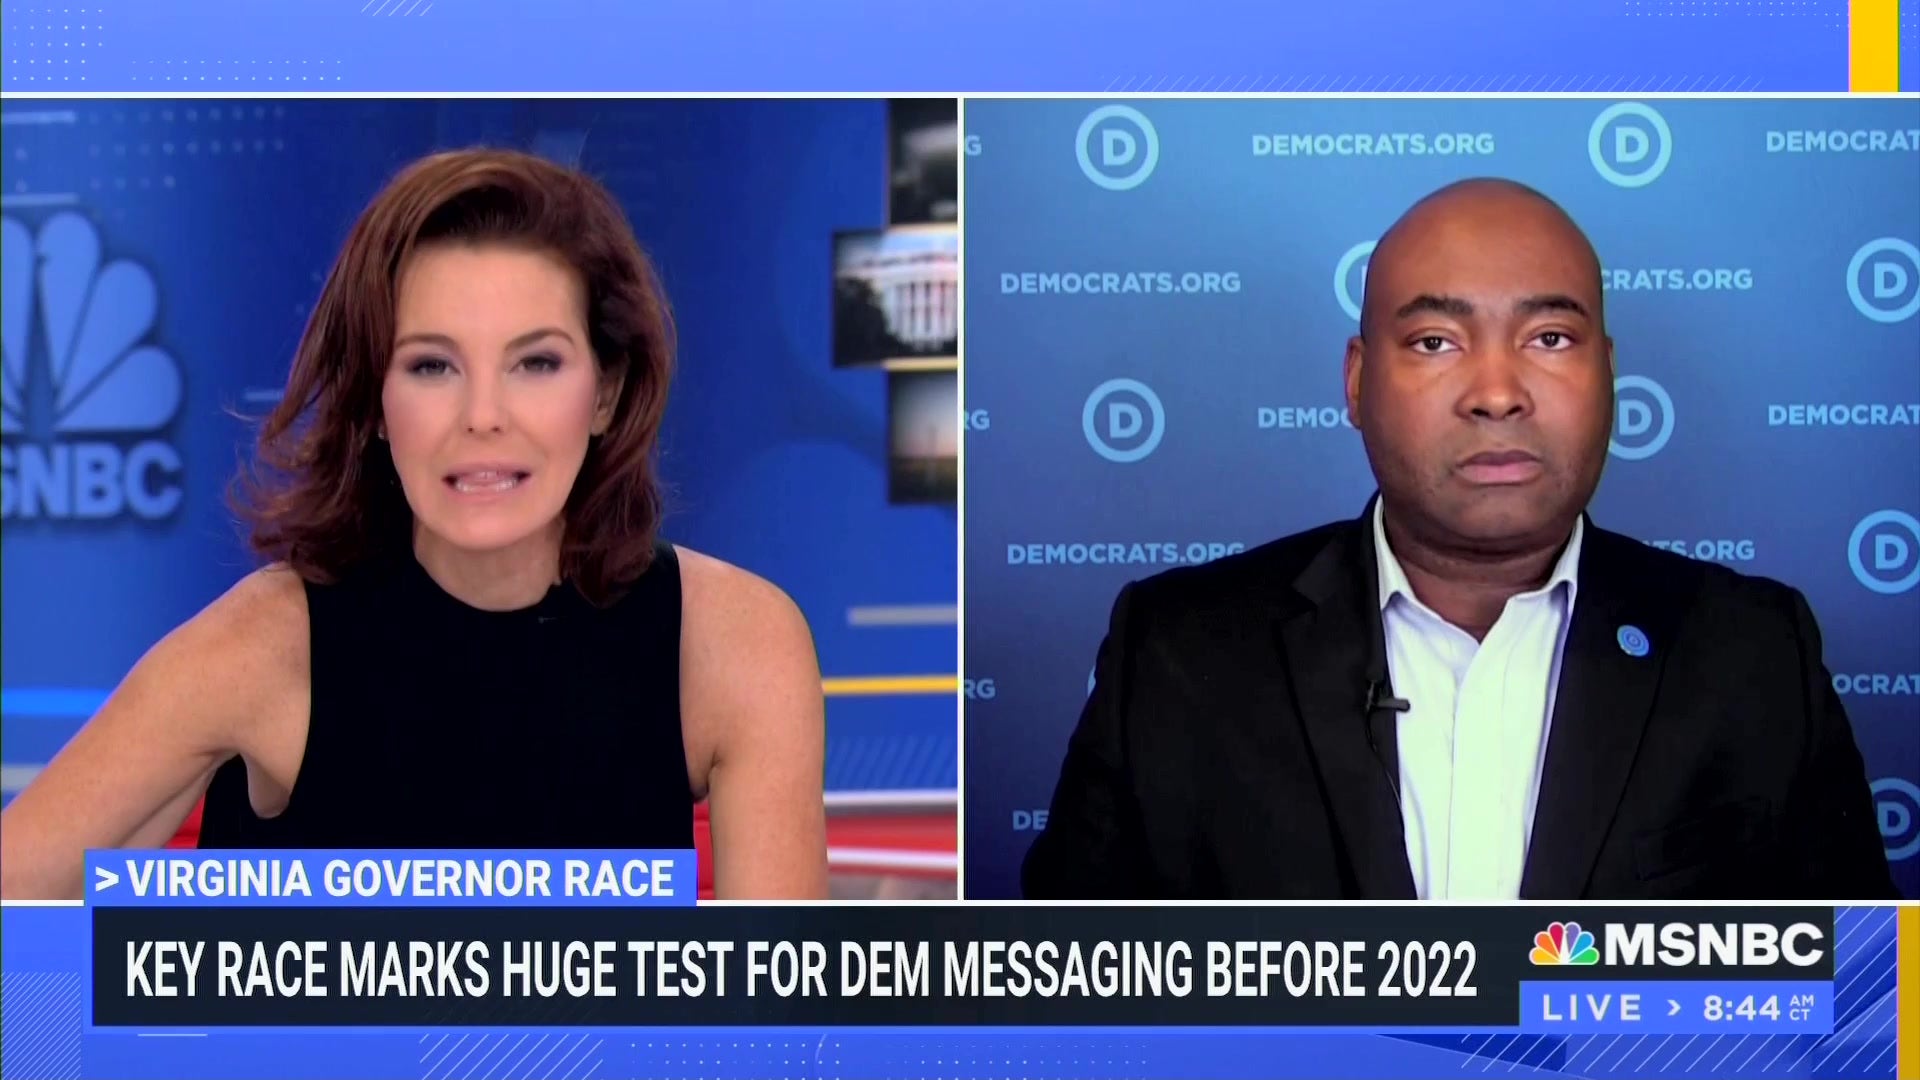 MSNBC's Stephanie Ruhle grills DNC chair on Dems running 'against Trump,' not on policy: 'He's not in power!'